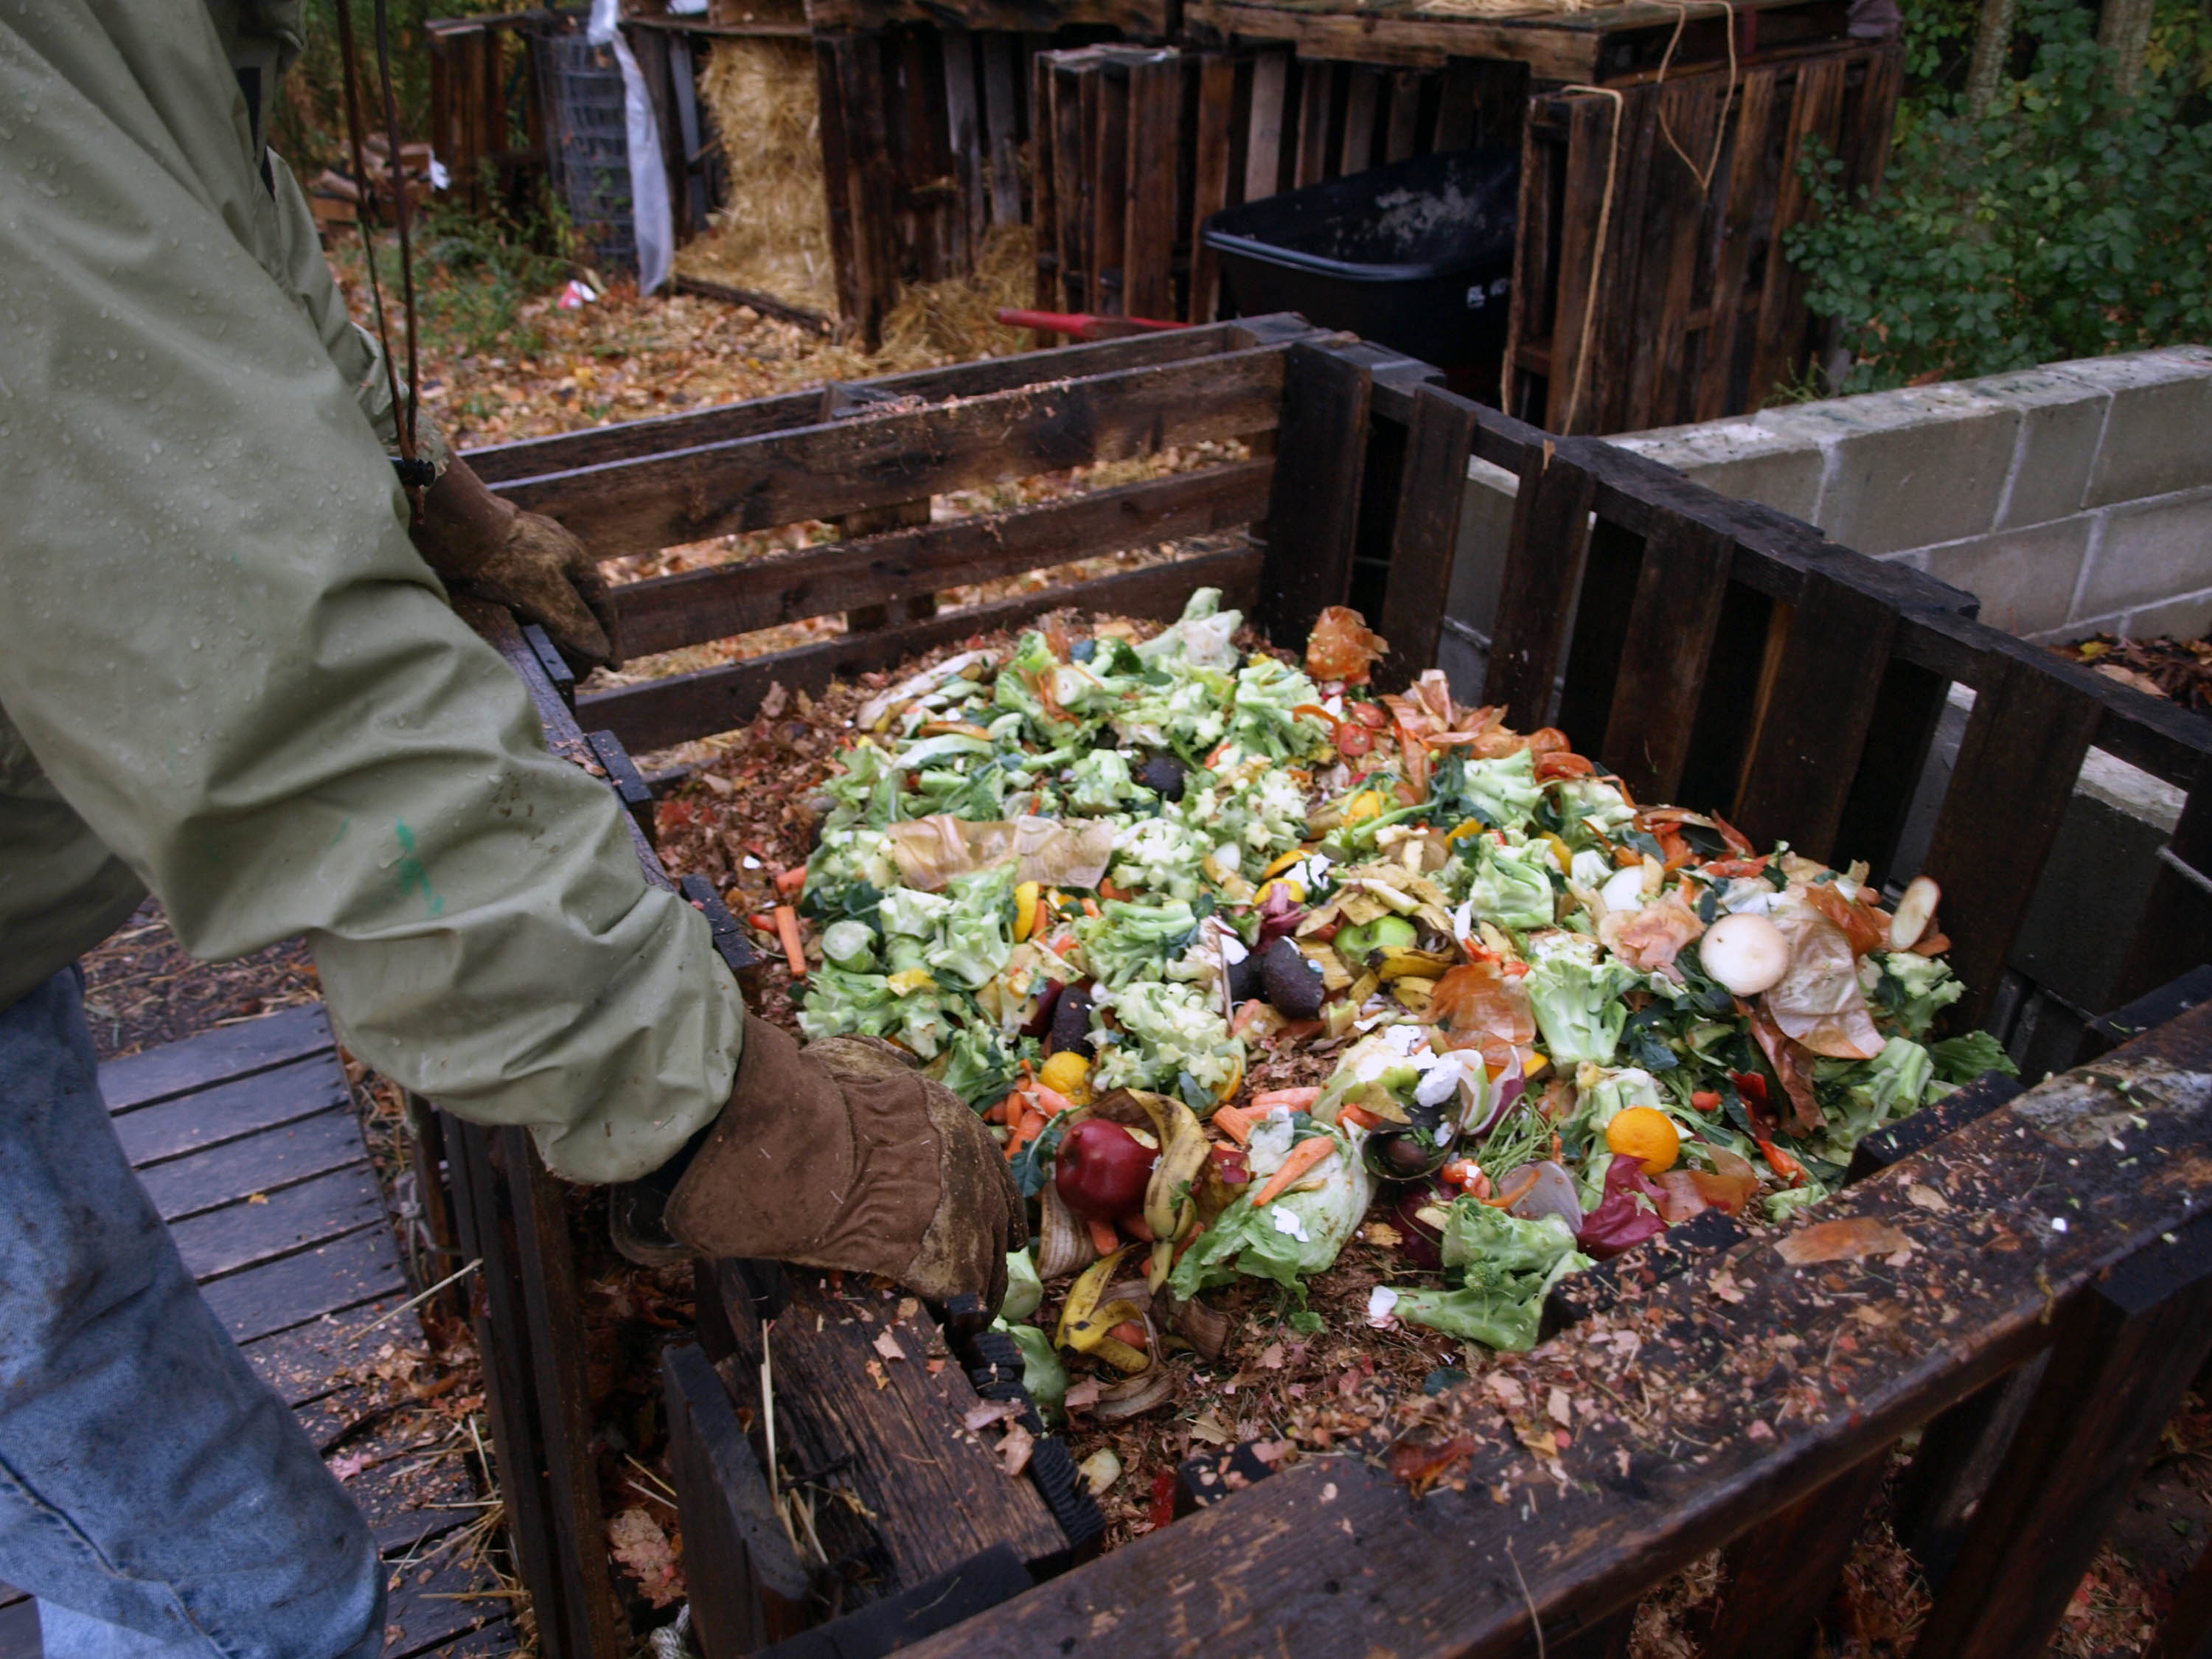 As Kip Jacob rests between adding layers of leaves and food scraps, his compost pile is already breaking down into soil.
Photo by: Kendra Dawson